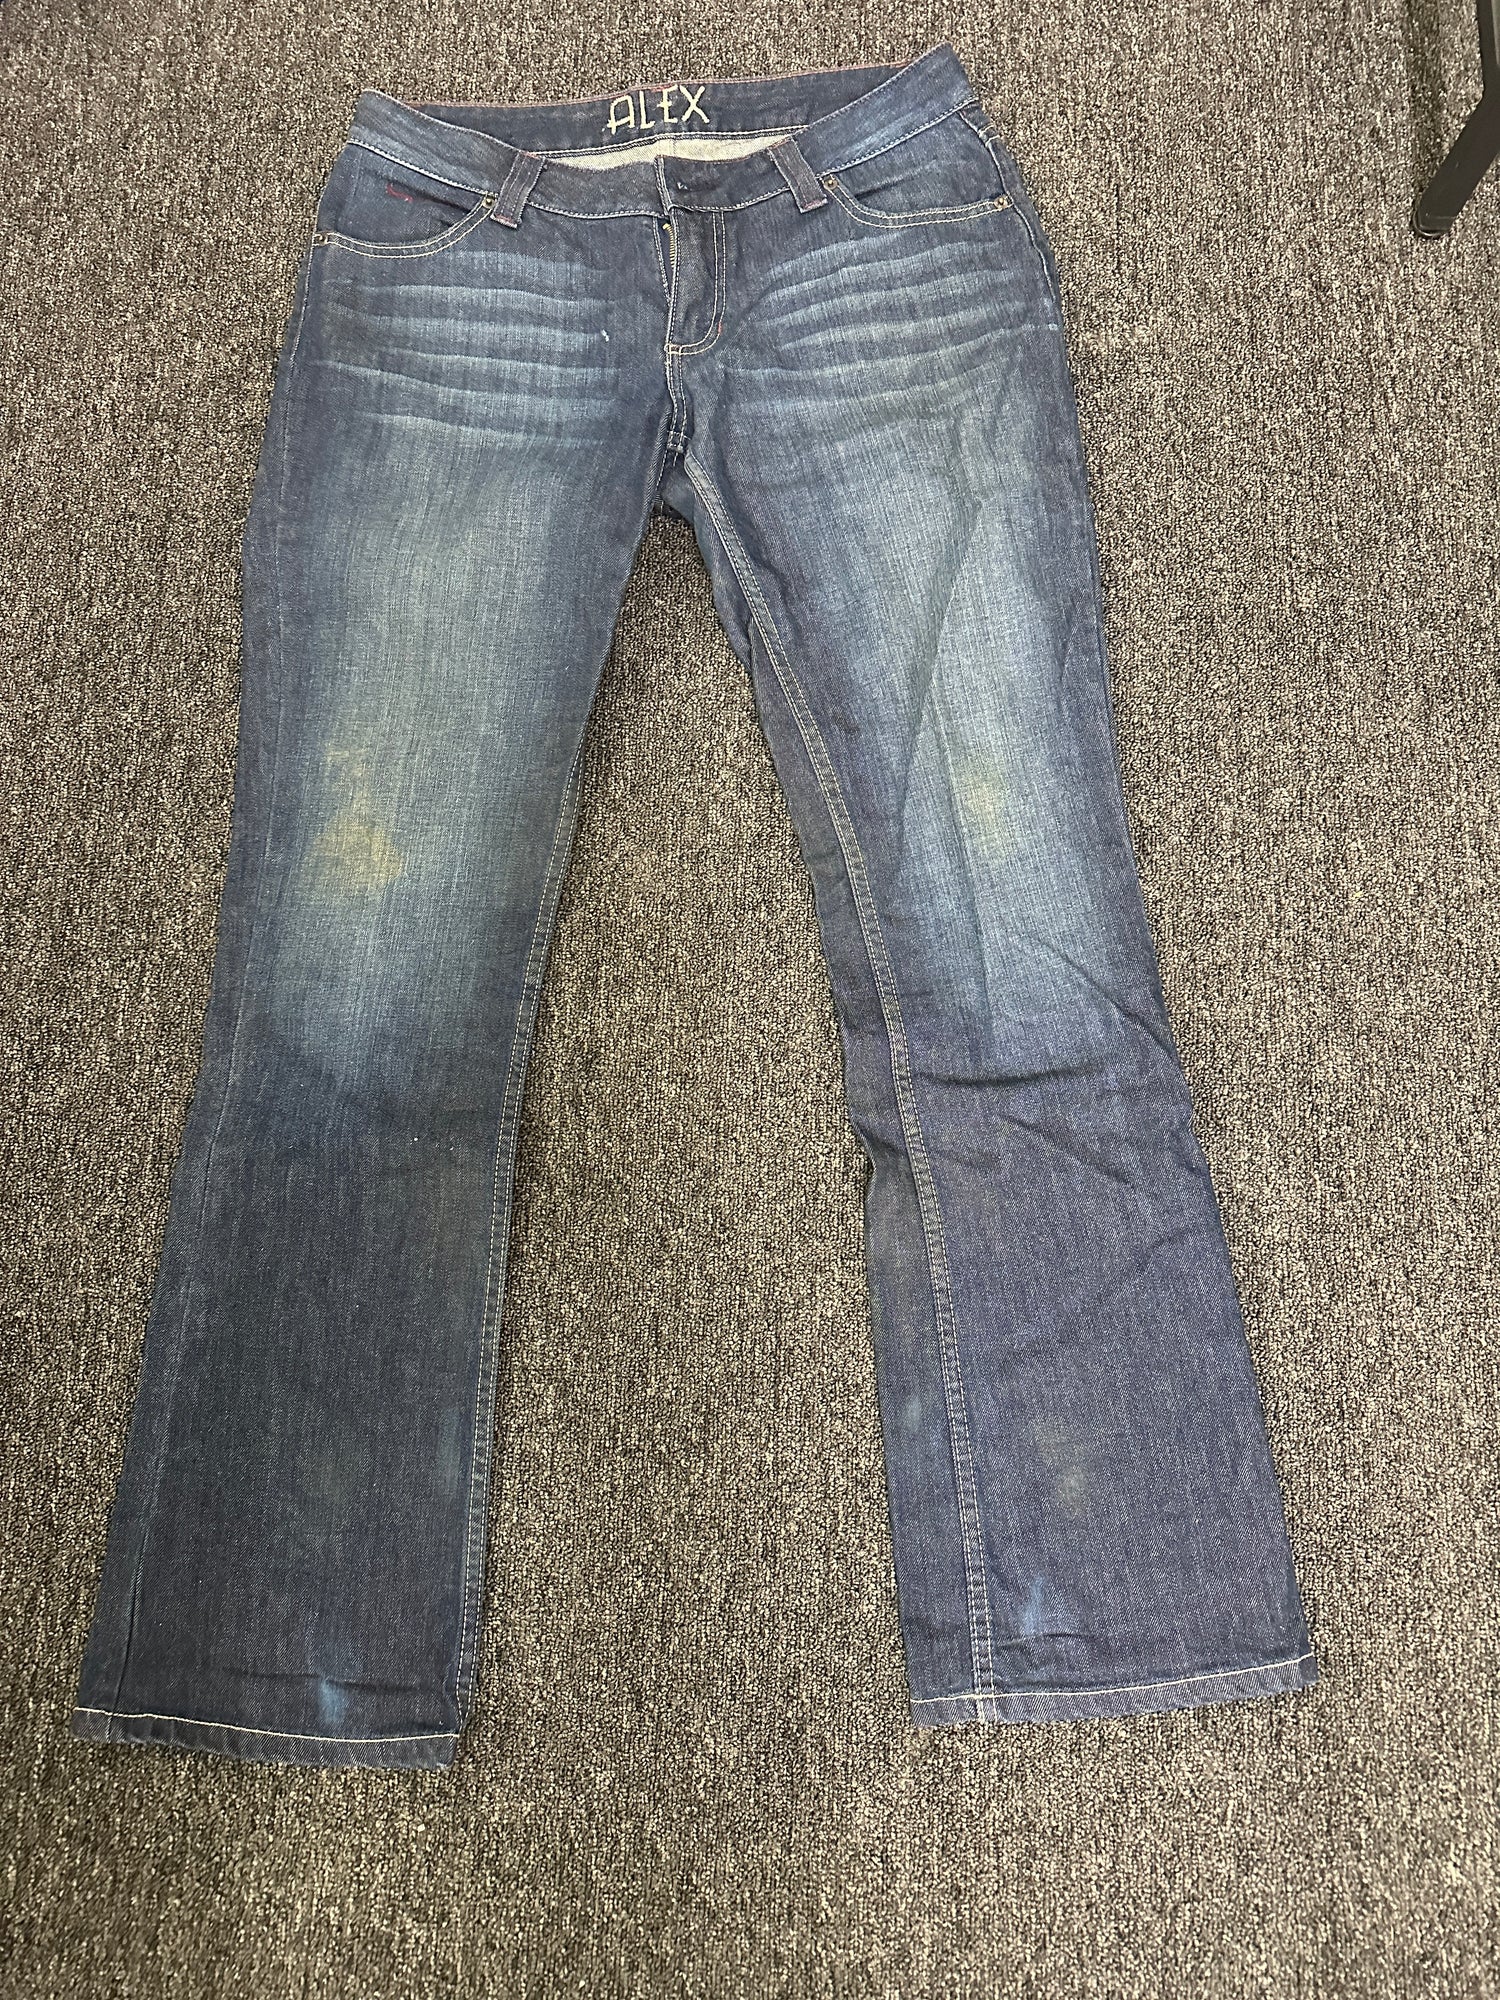 Women's Jeans - Kimes Alex size 6/32 used in good condition